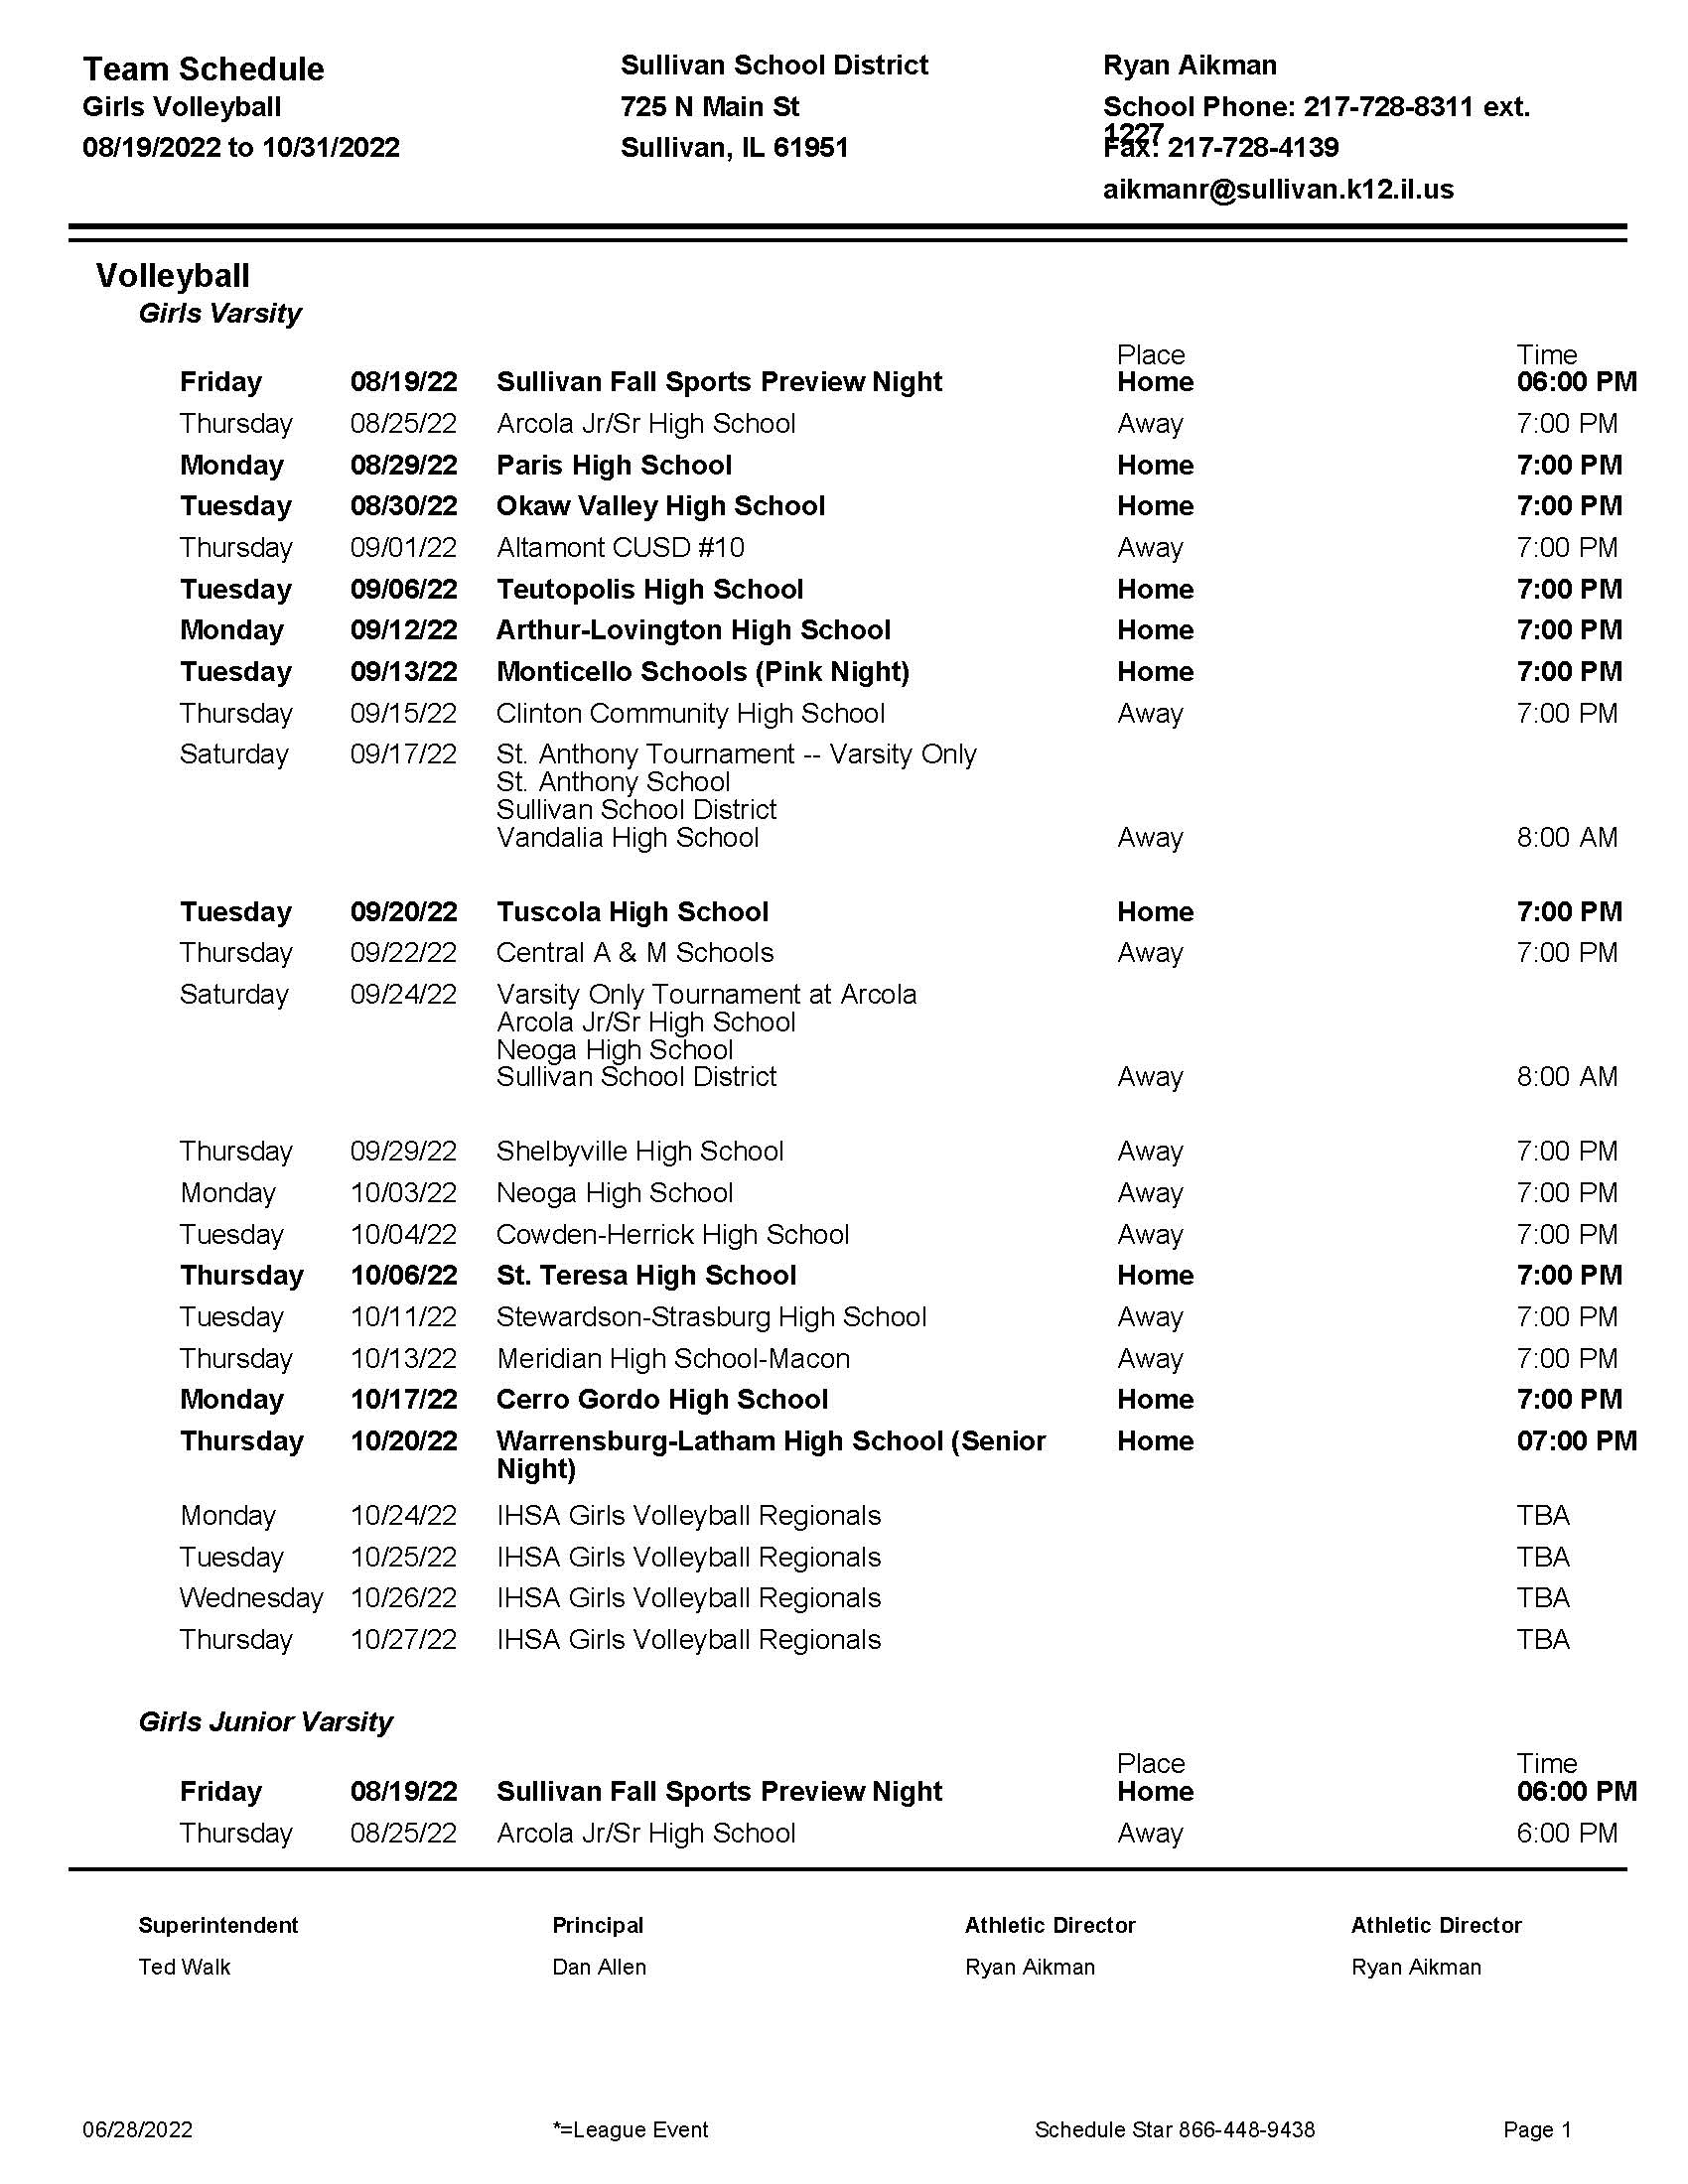 Schedule for VB